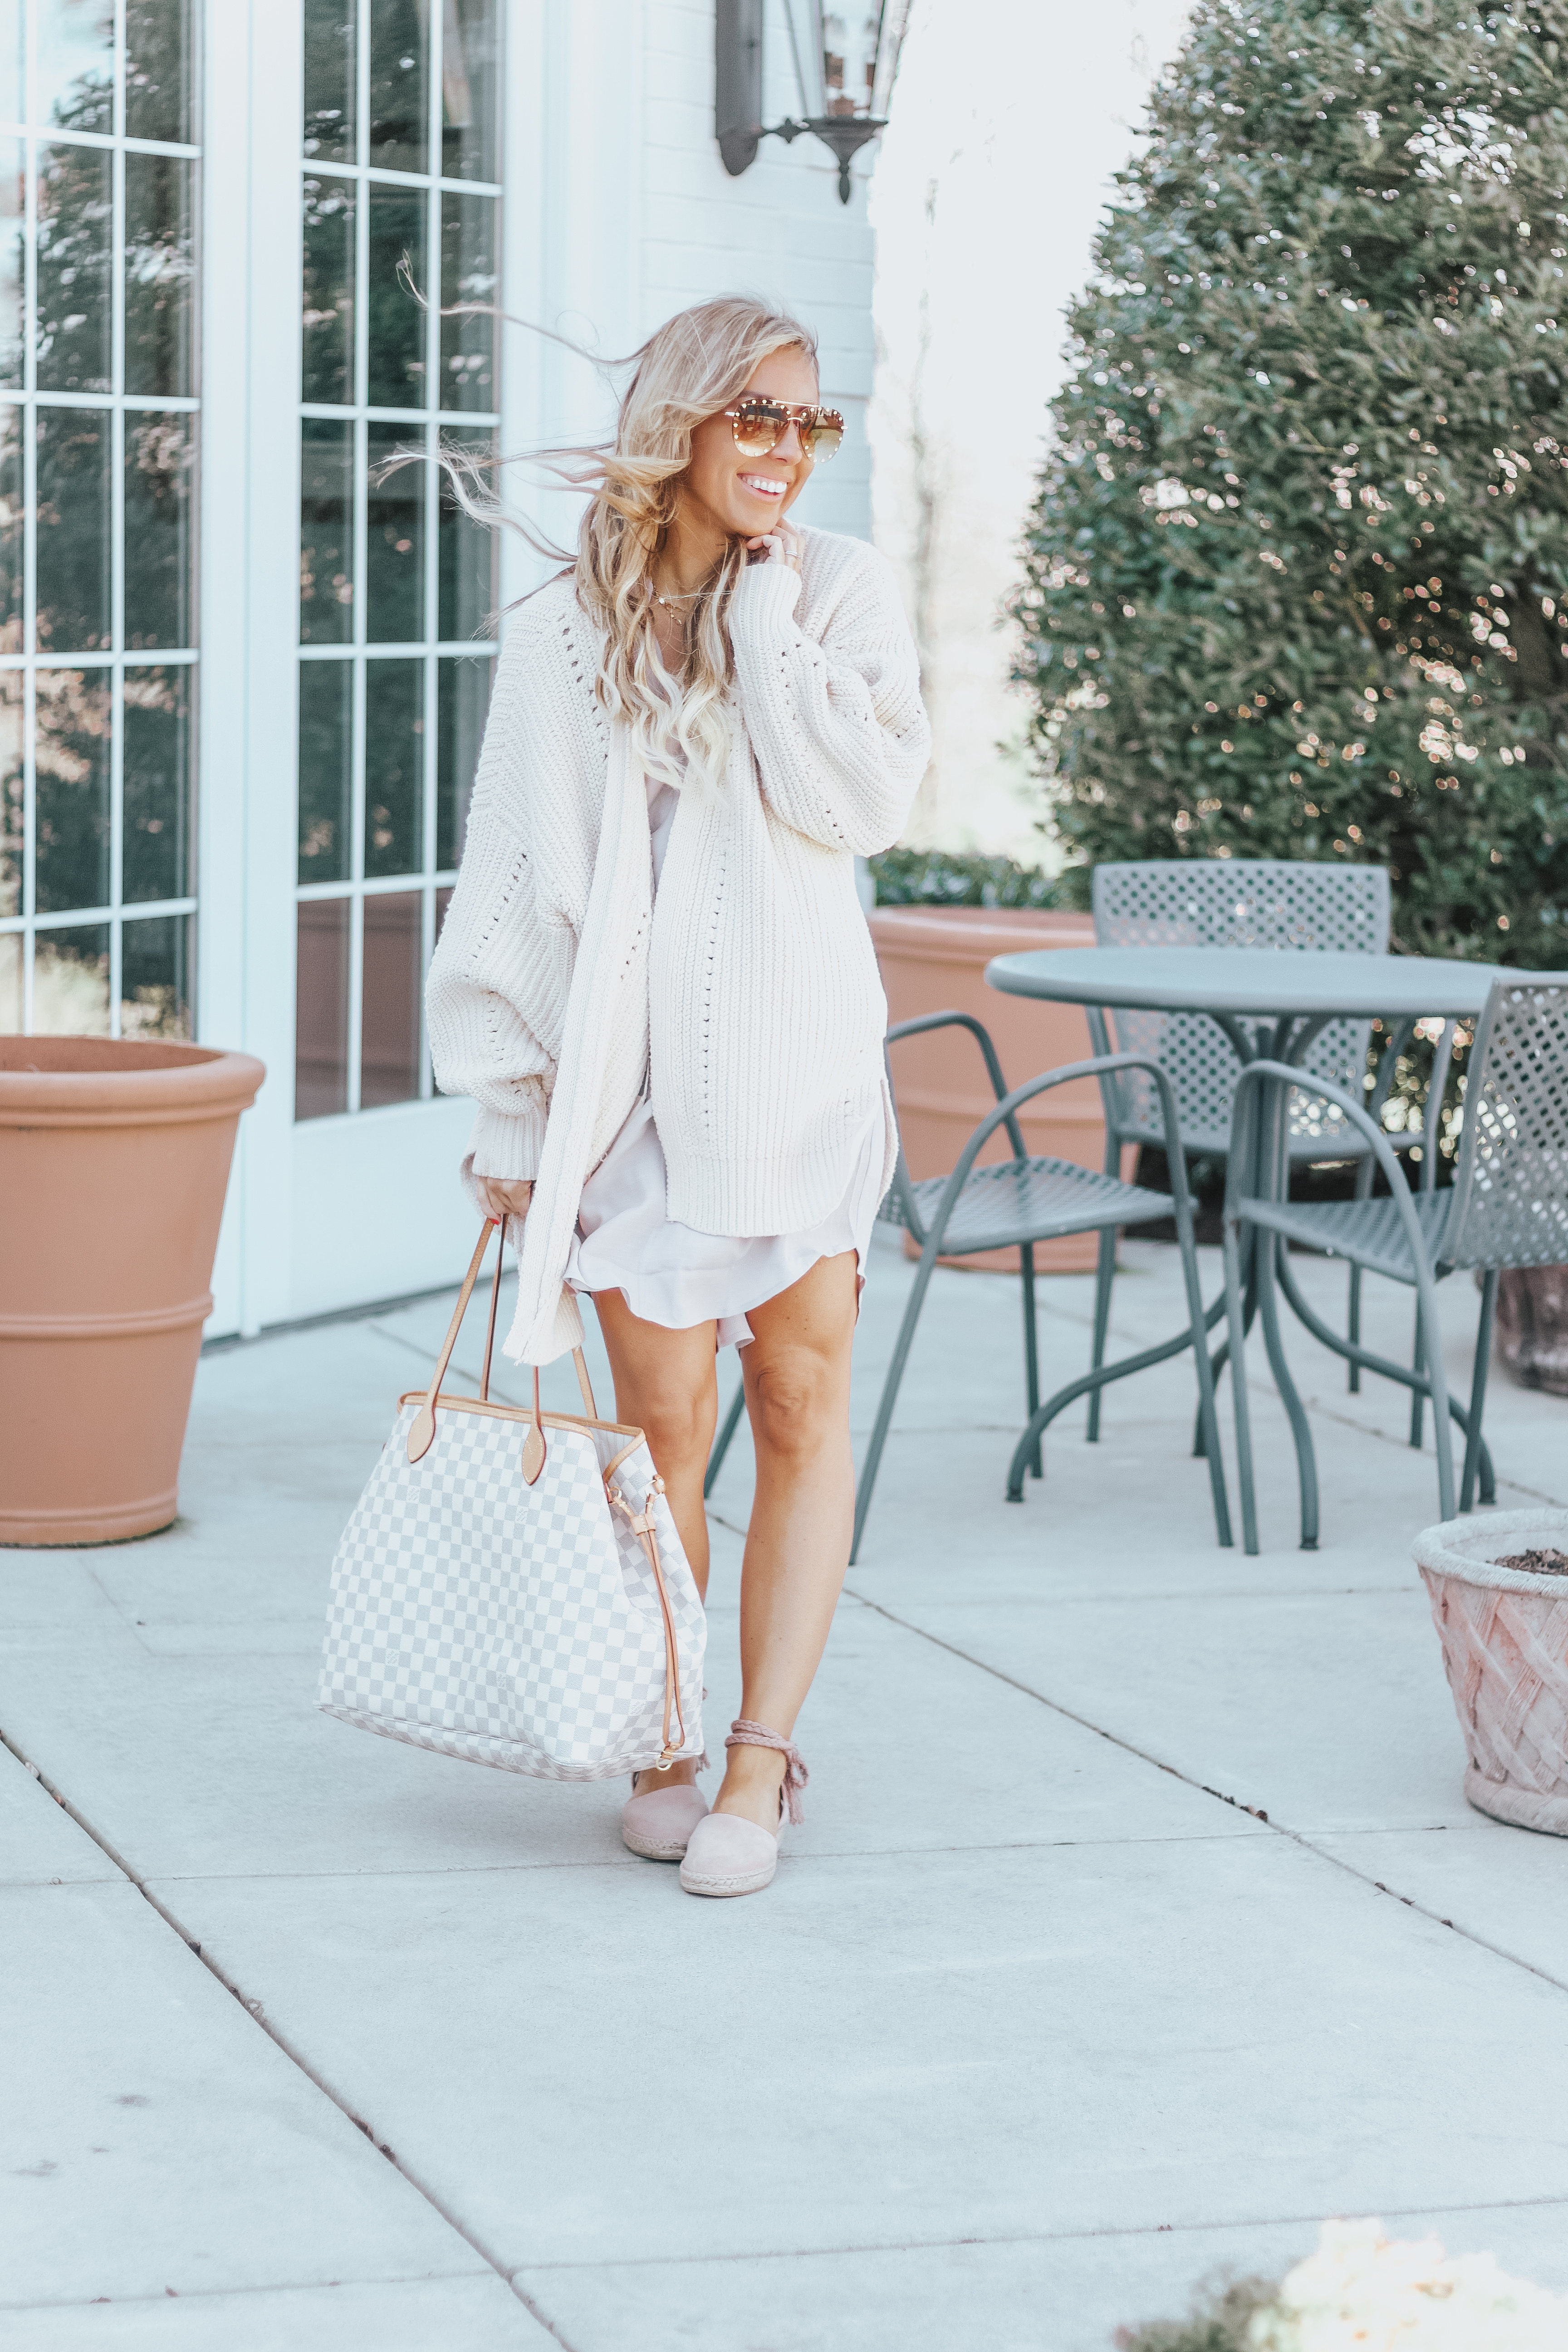 Spring Neutrals - According to Blaire